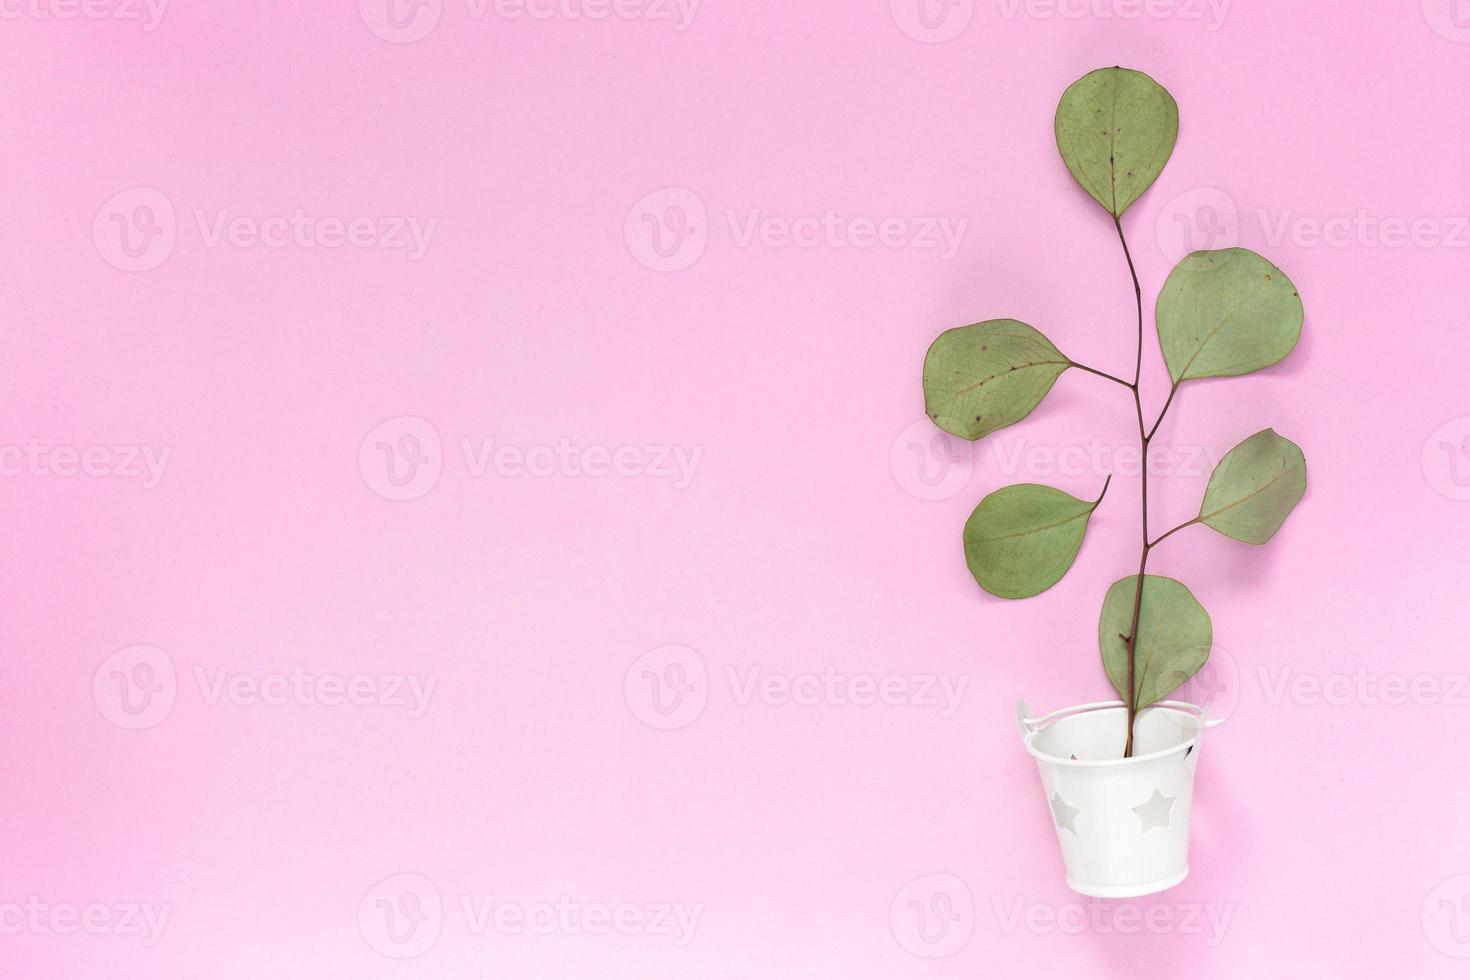 Sprig with leaves in a white bucket on a plain pink background with an area photo